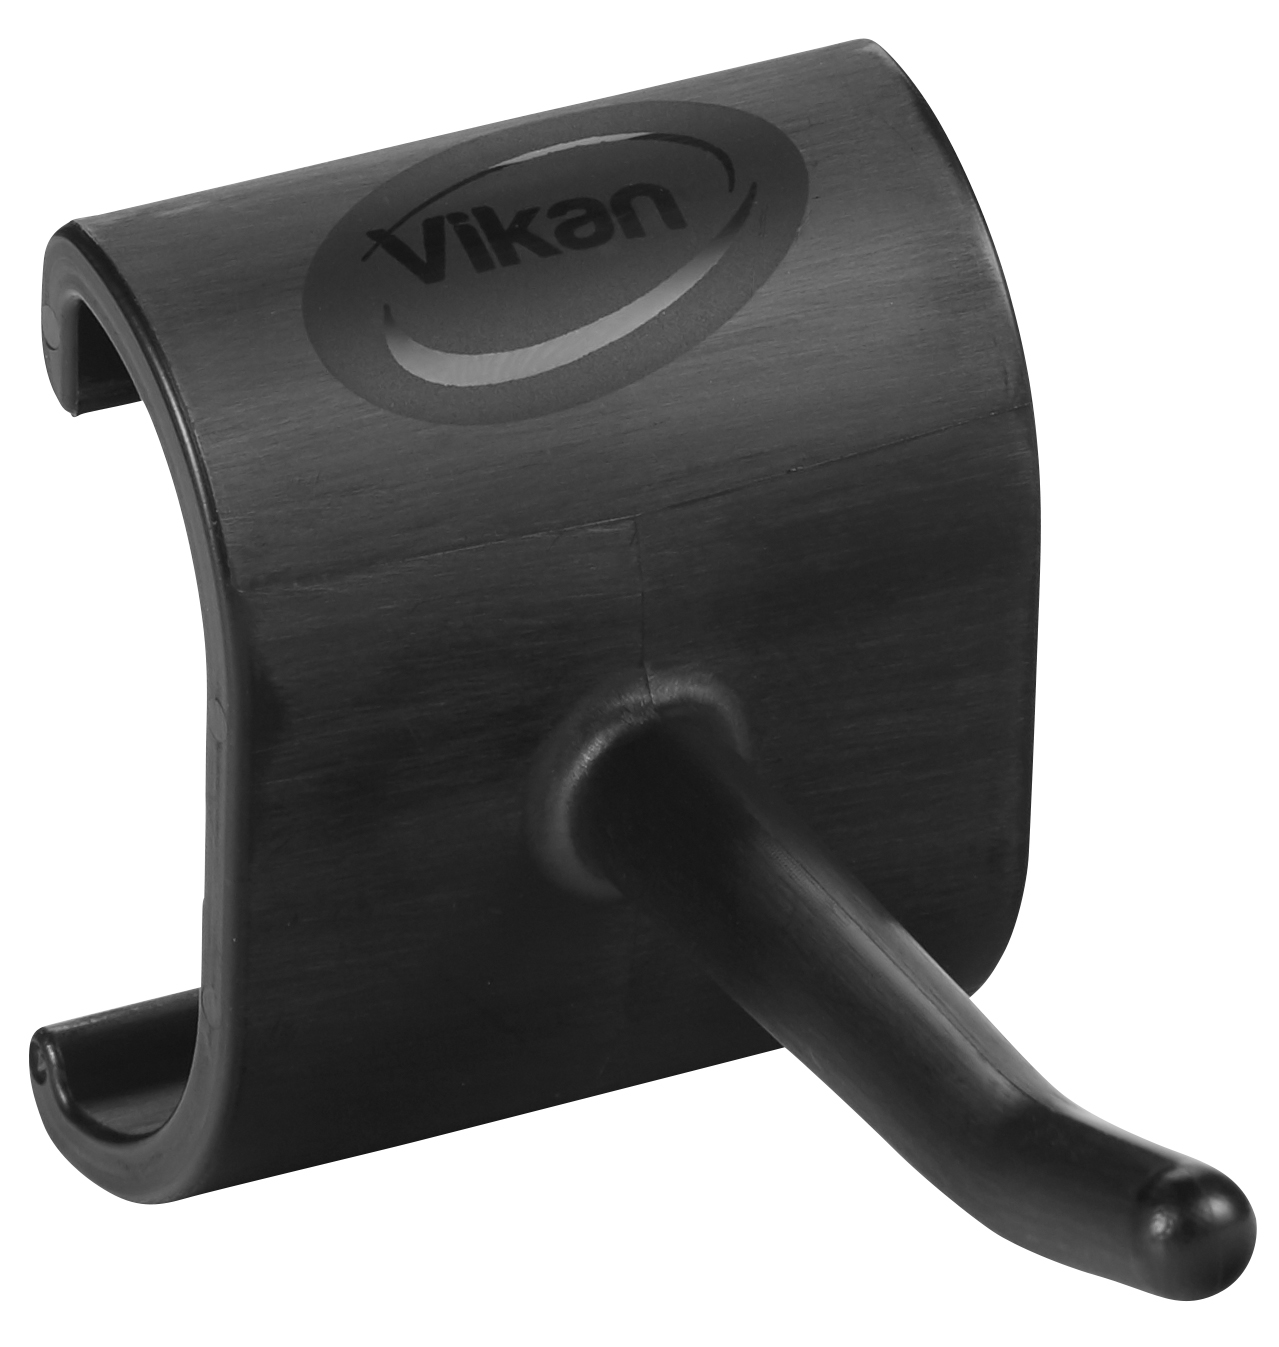 Vikan spare part hook for 1011x, 1012x & 1014x, Black